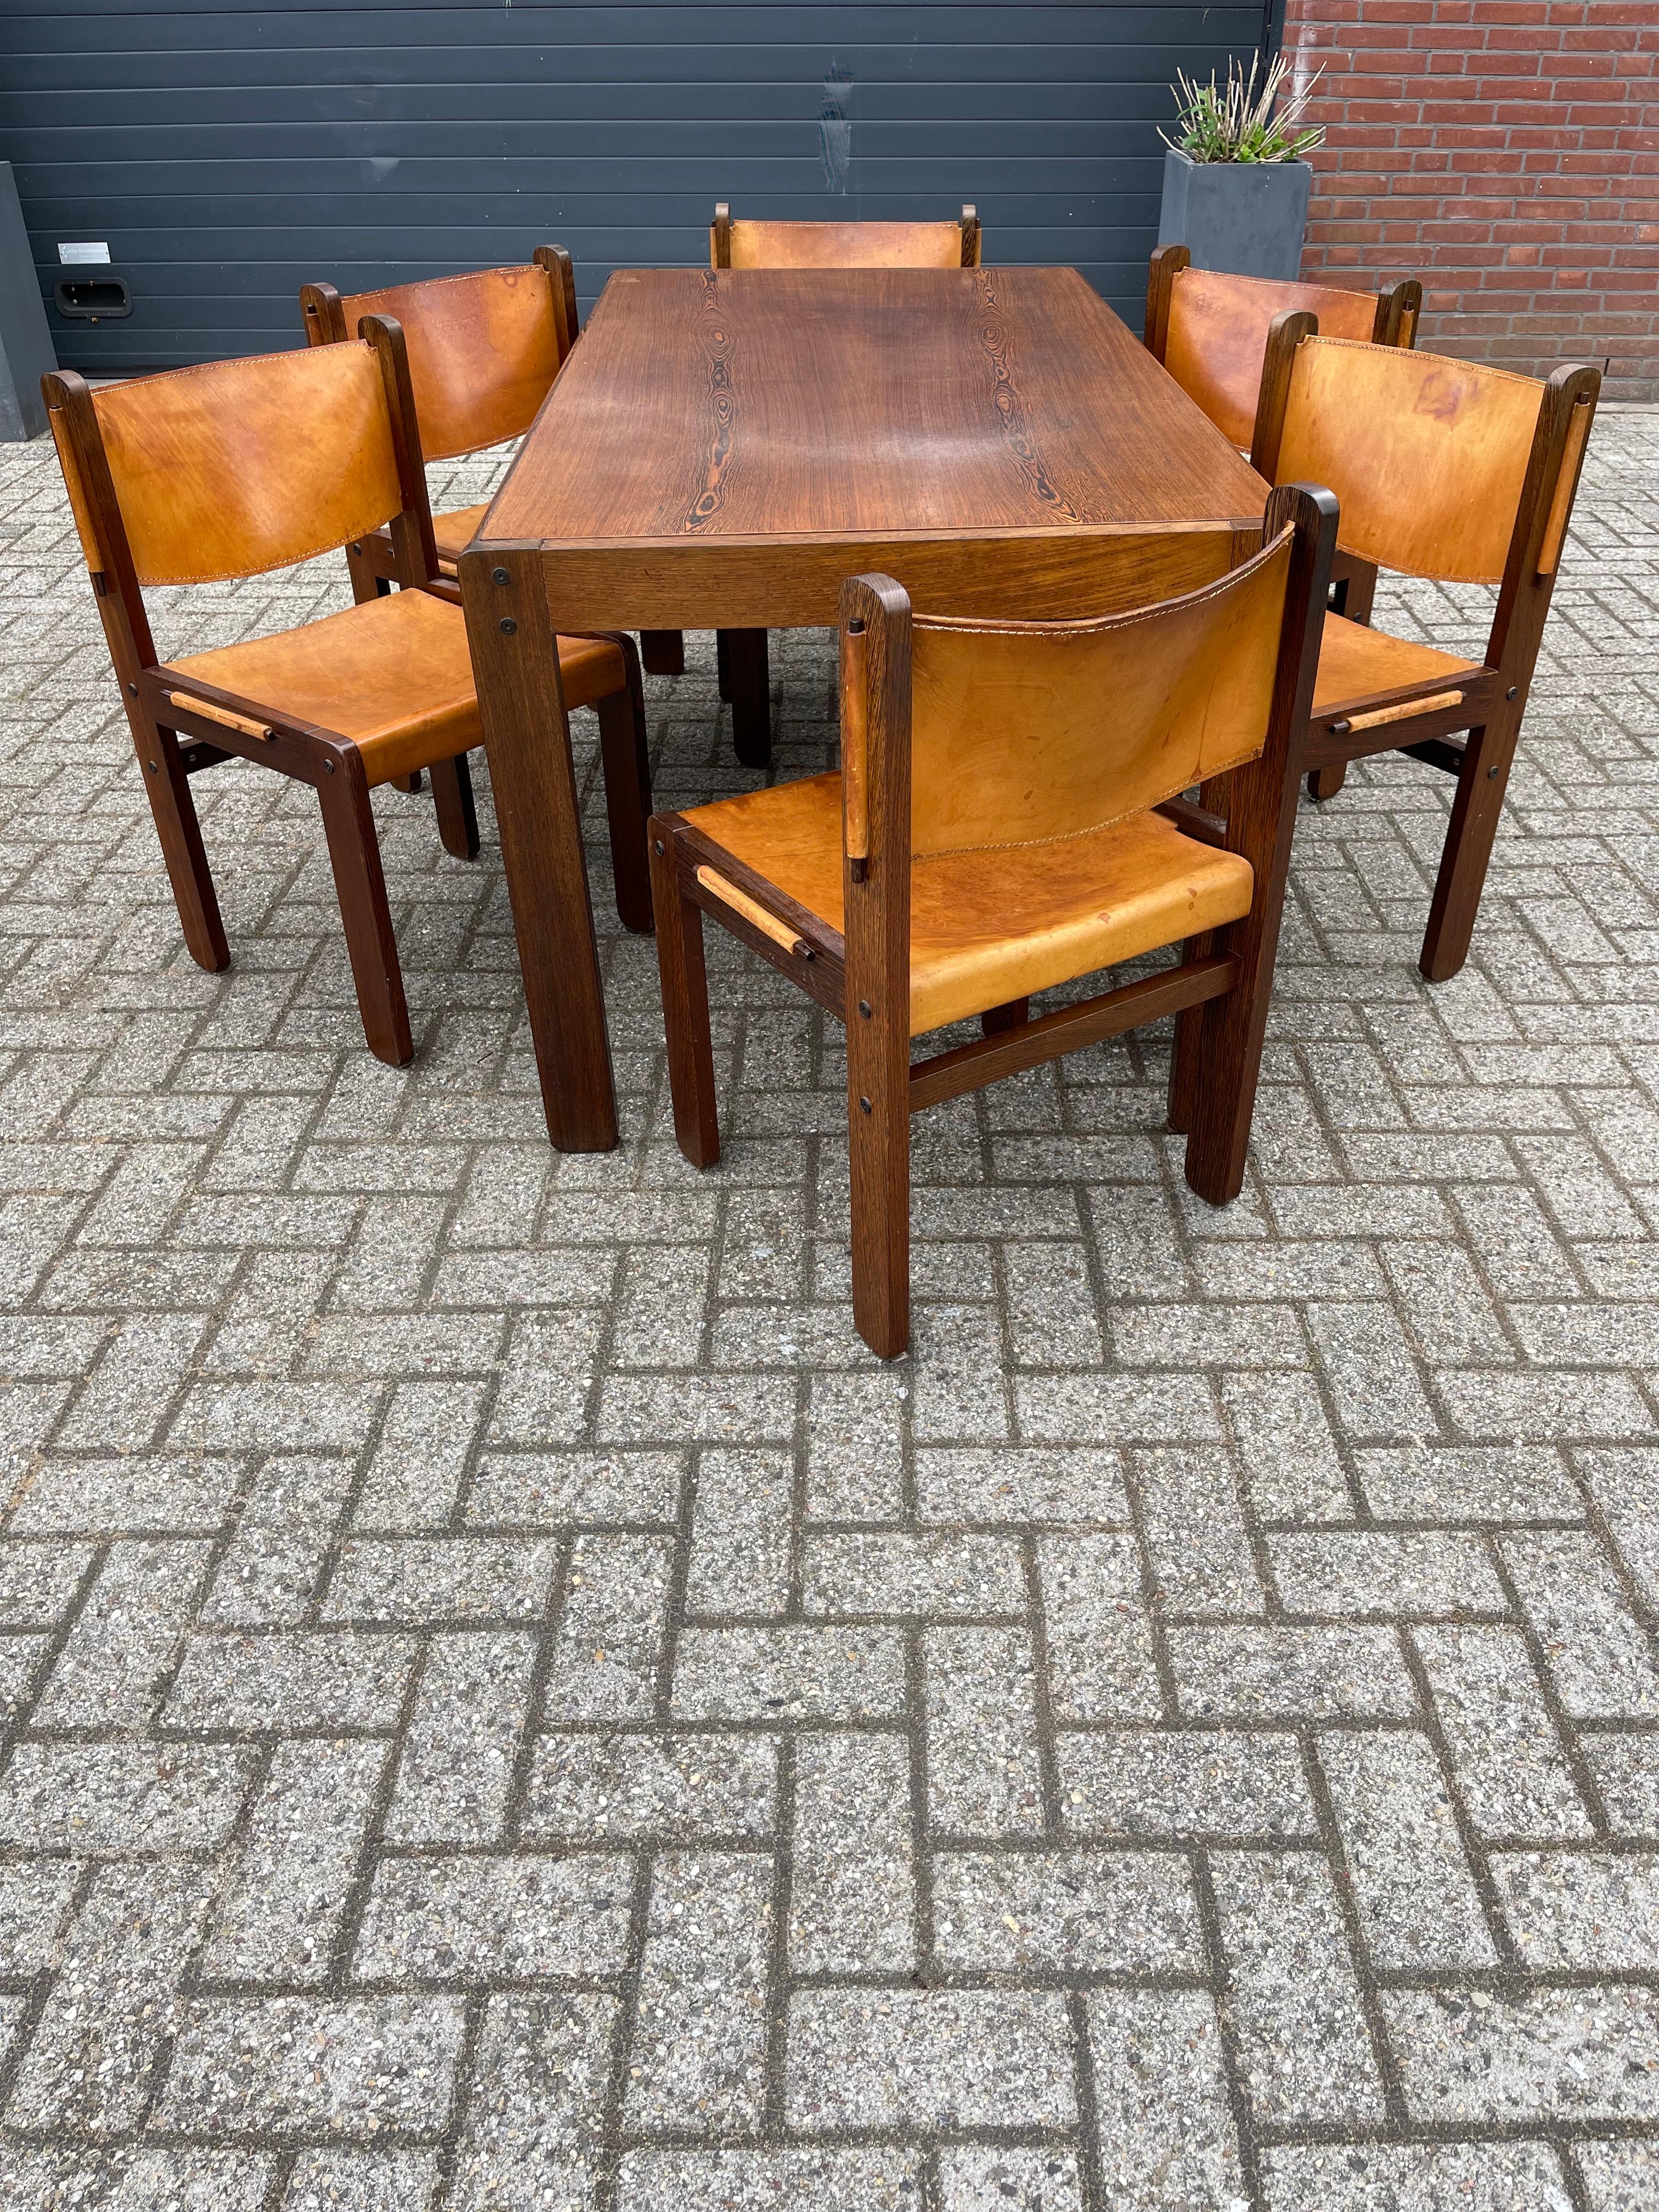 Rare set of six Mid-Century Modern chairs and table, 1970.

If you are looking for a great quality dining set for your home or office then these midcentury made chairs and table could be perfect for you. All hand-crafted out of solid wengé (a